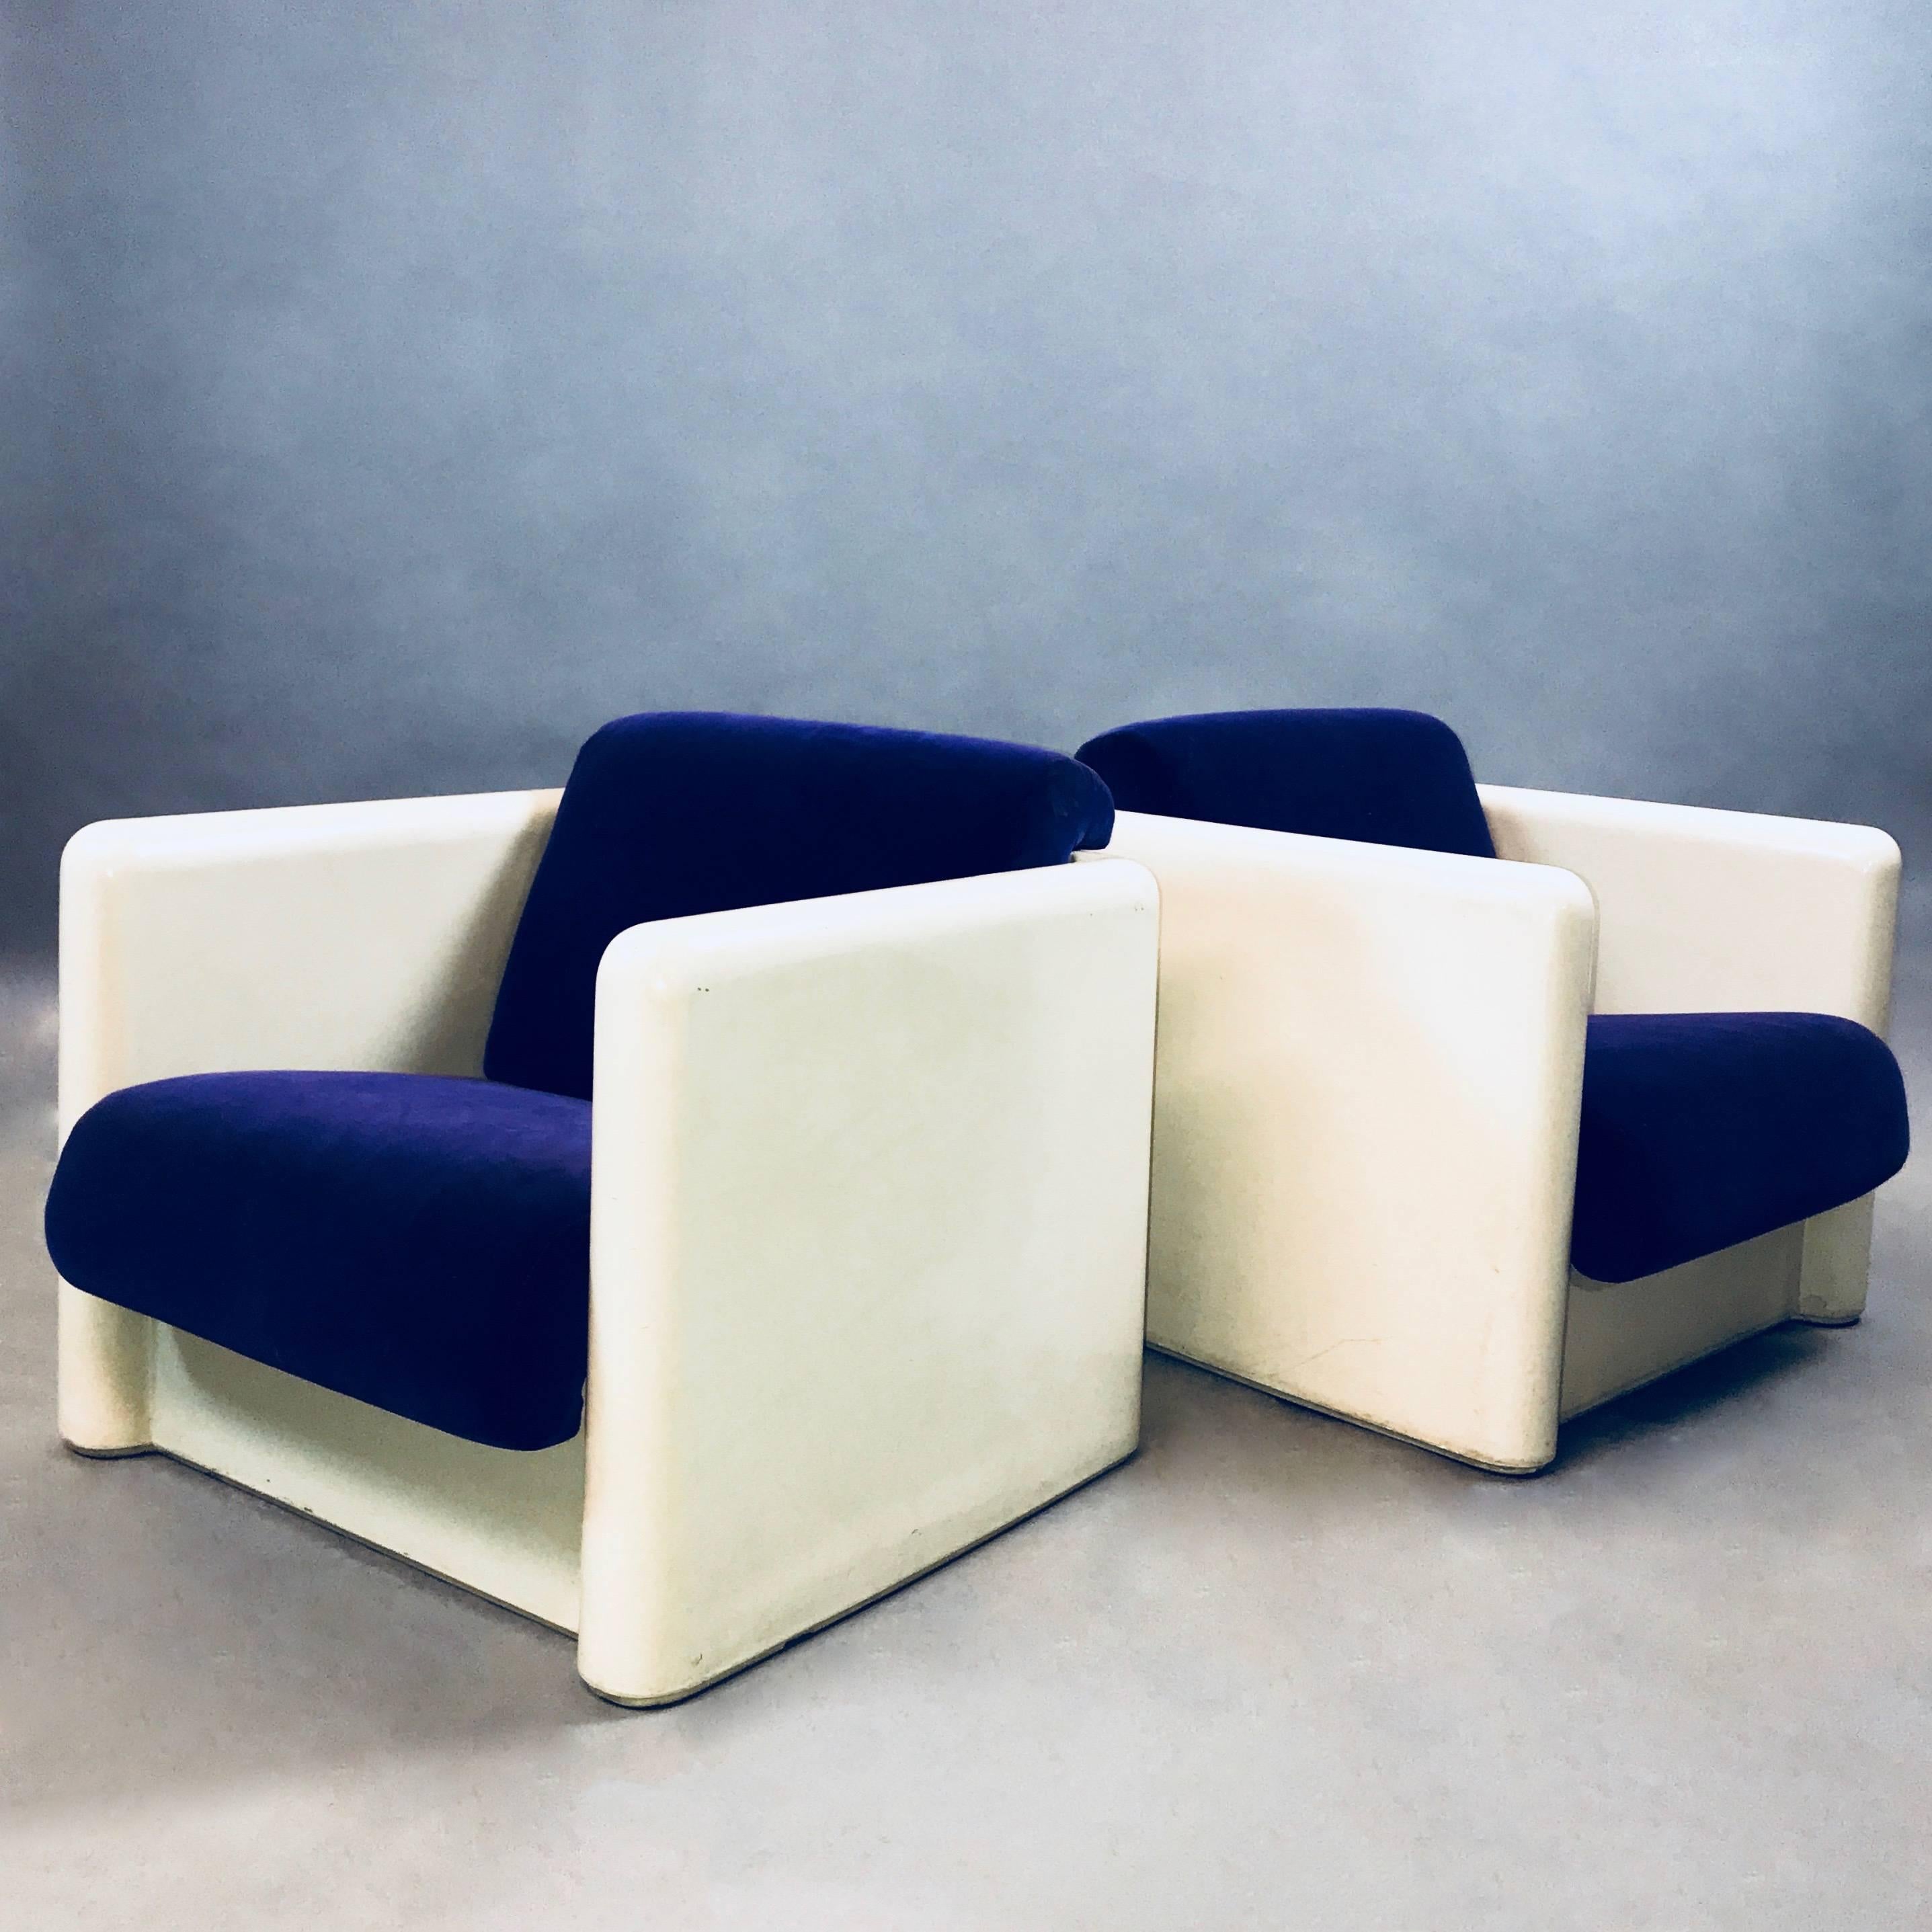 Impressive pair of modernist, molded, white fiberglass, cubed, club, lounge chairs with upholstered seats and backs in striking, deep purple velvet. Seat depth is 19 in.